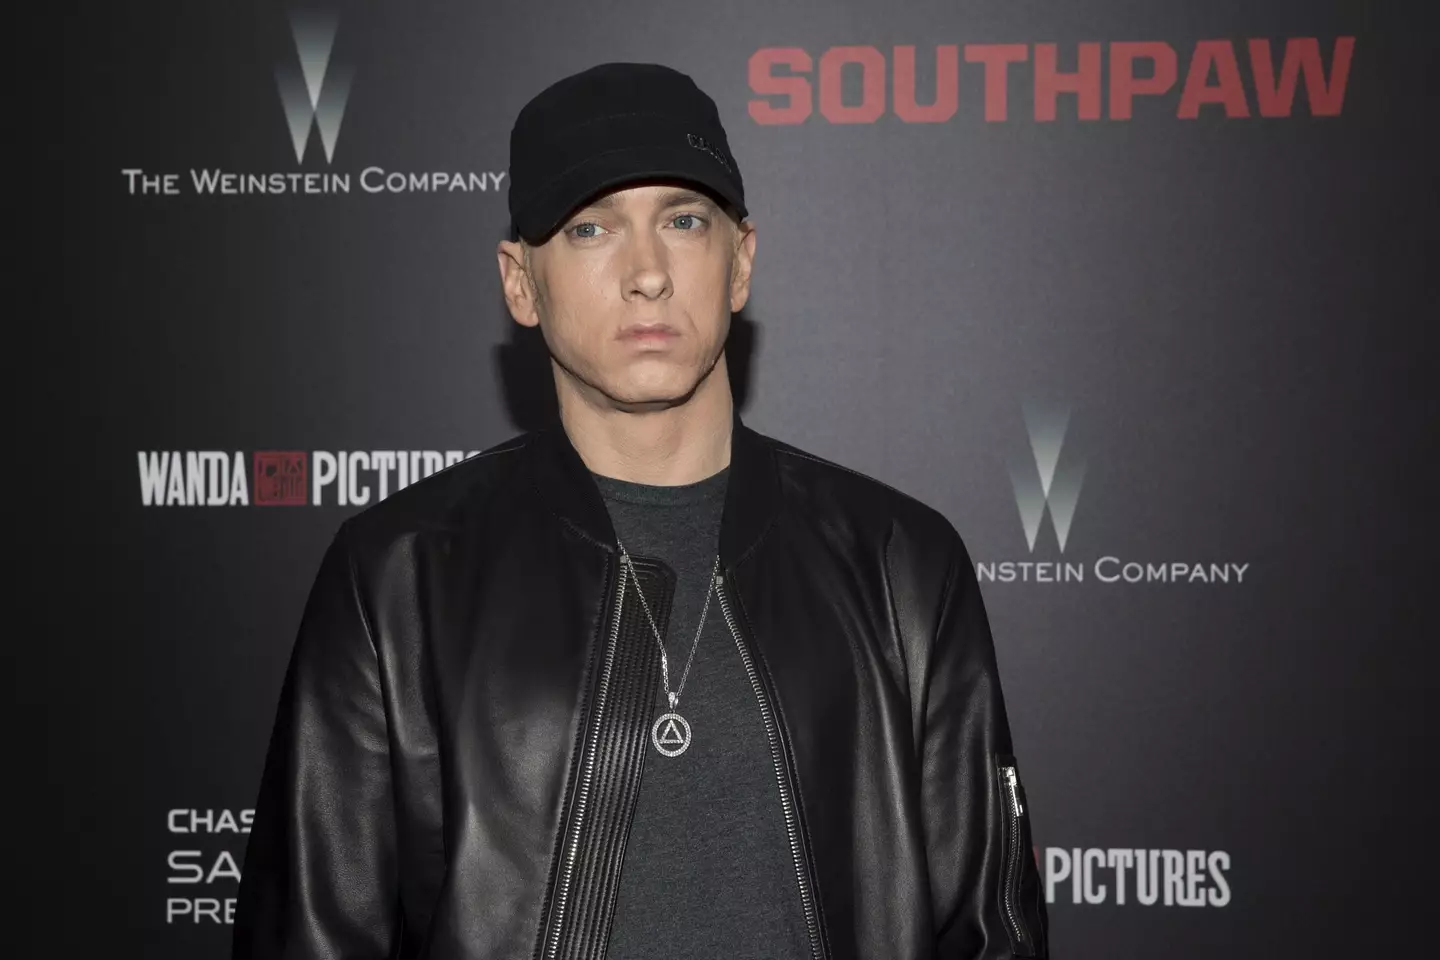 Eminem was inducted into the Rock and Roll Hall of Fame.